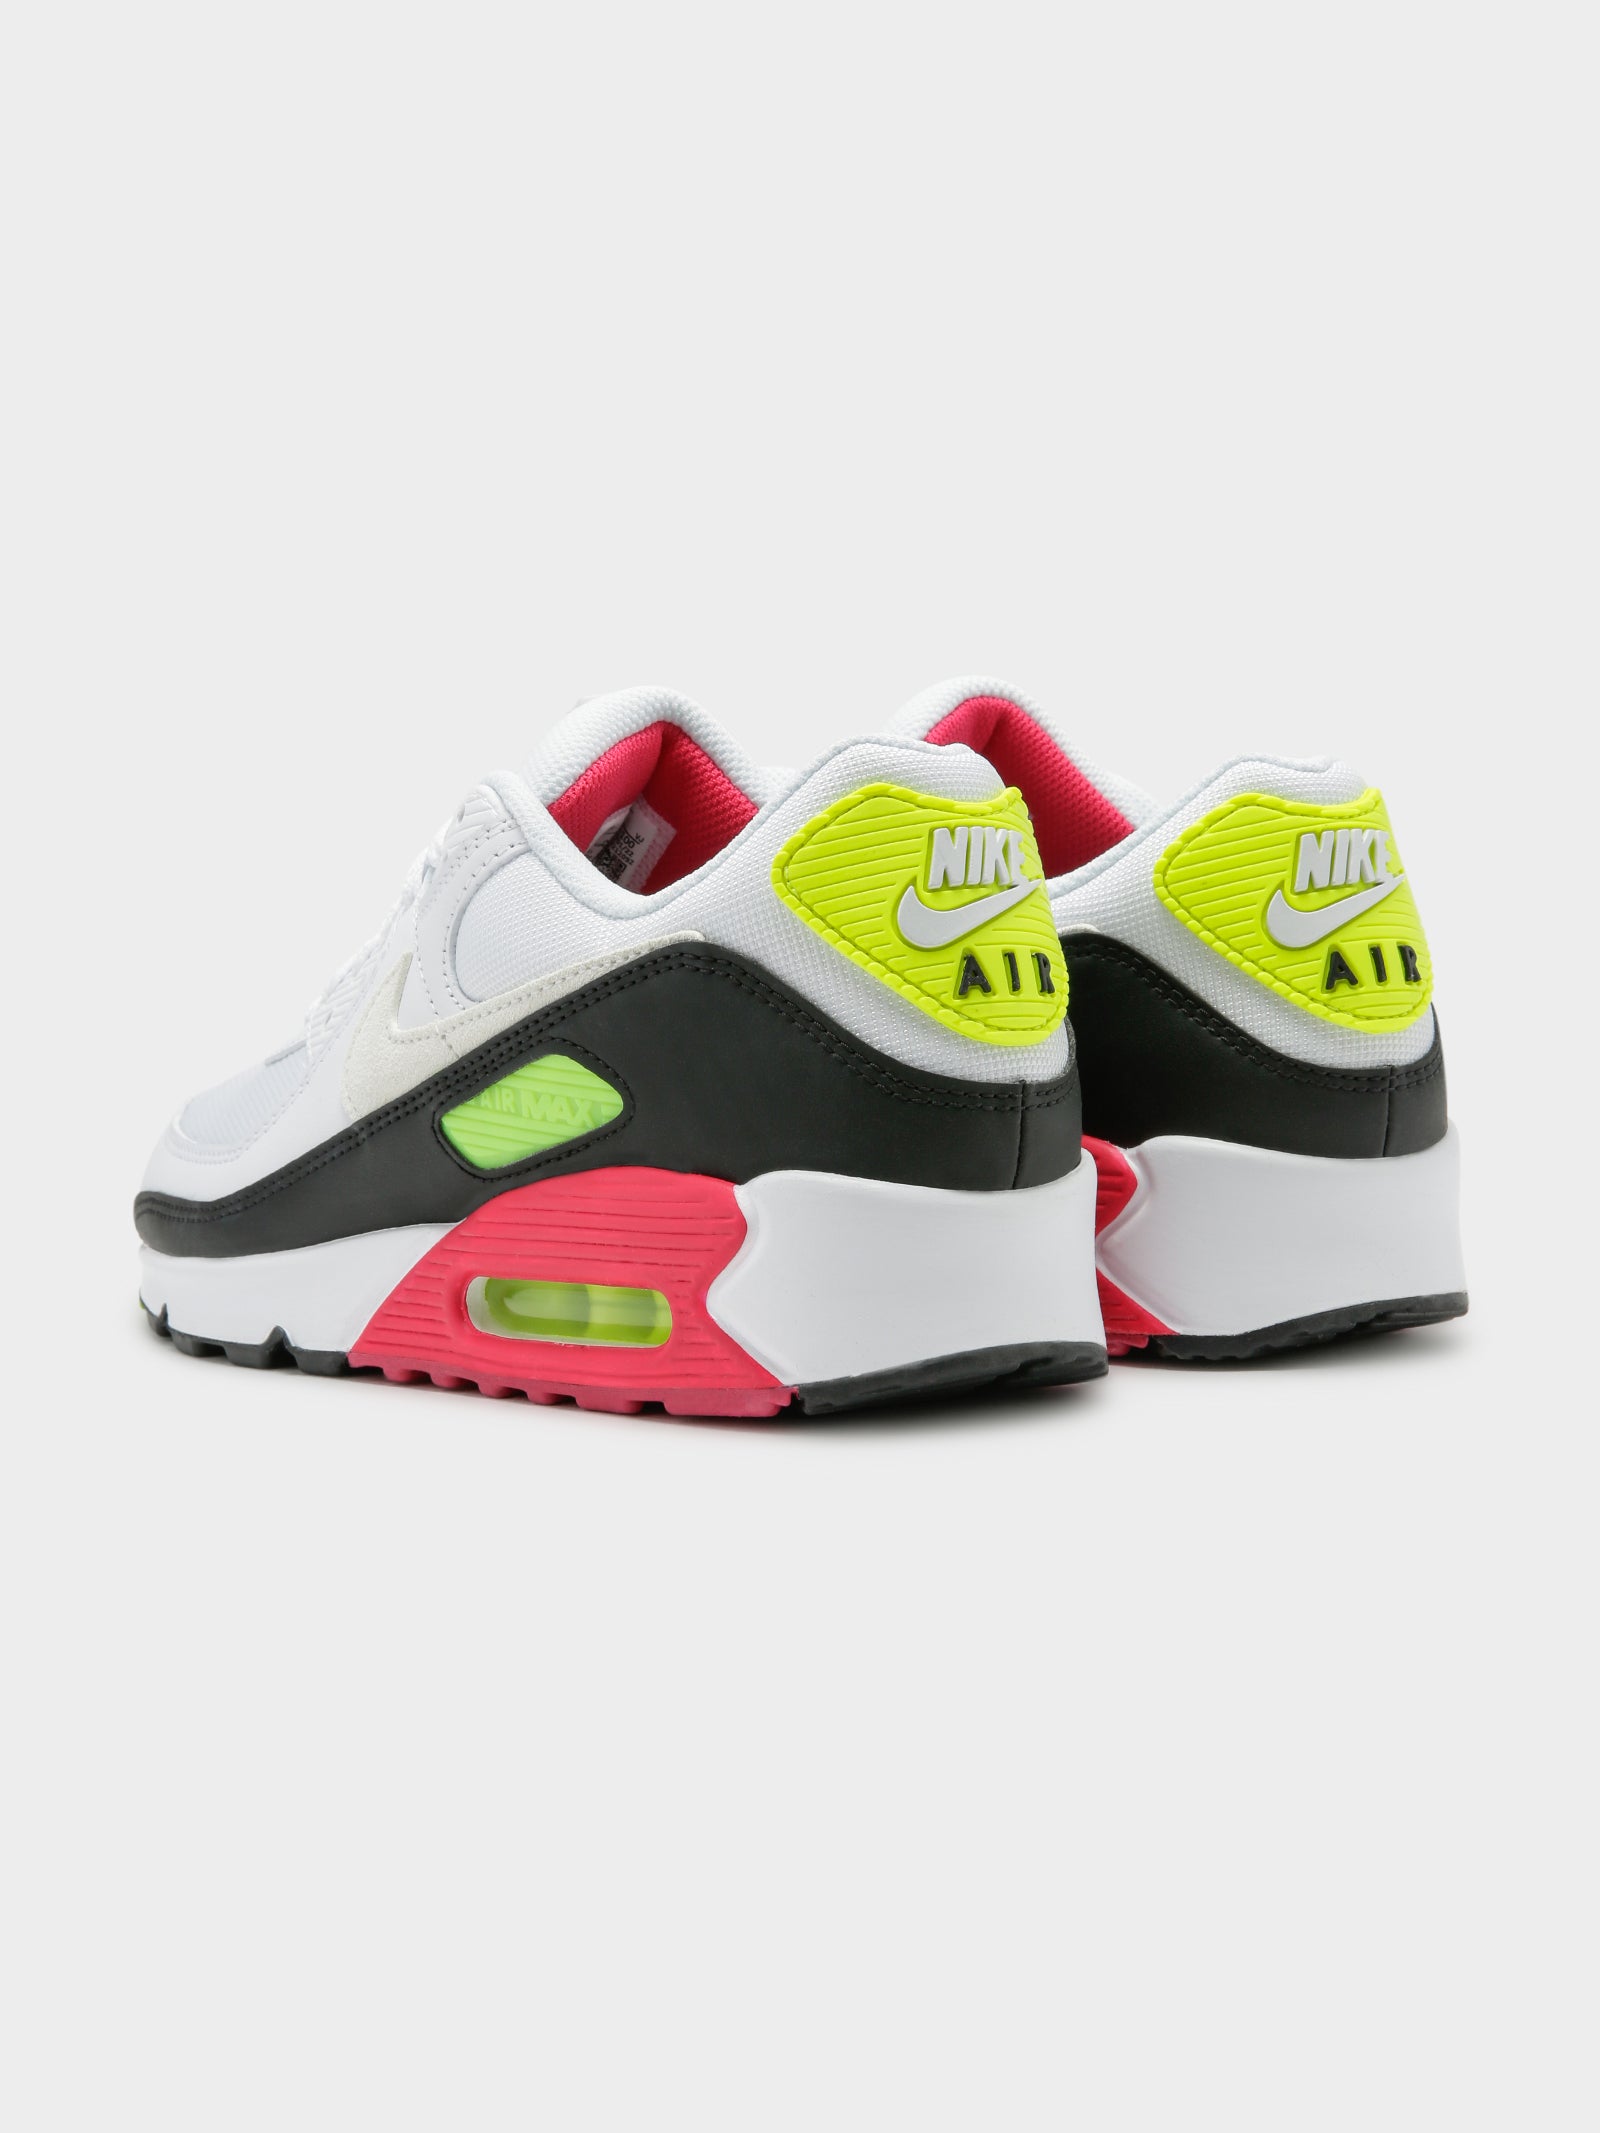 Mens Air Max 90 Sneakers in White & Green